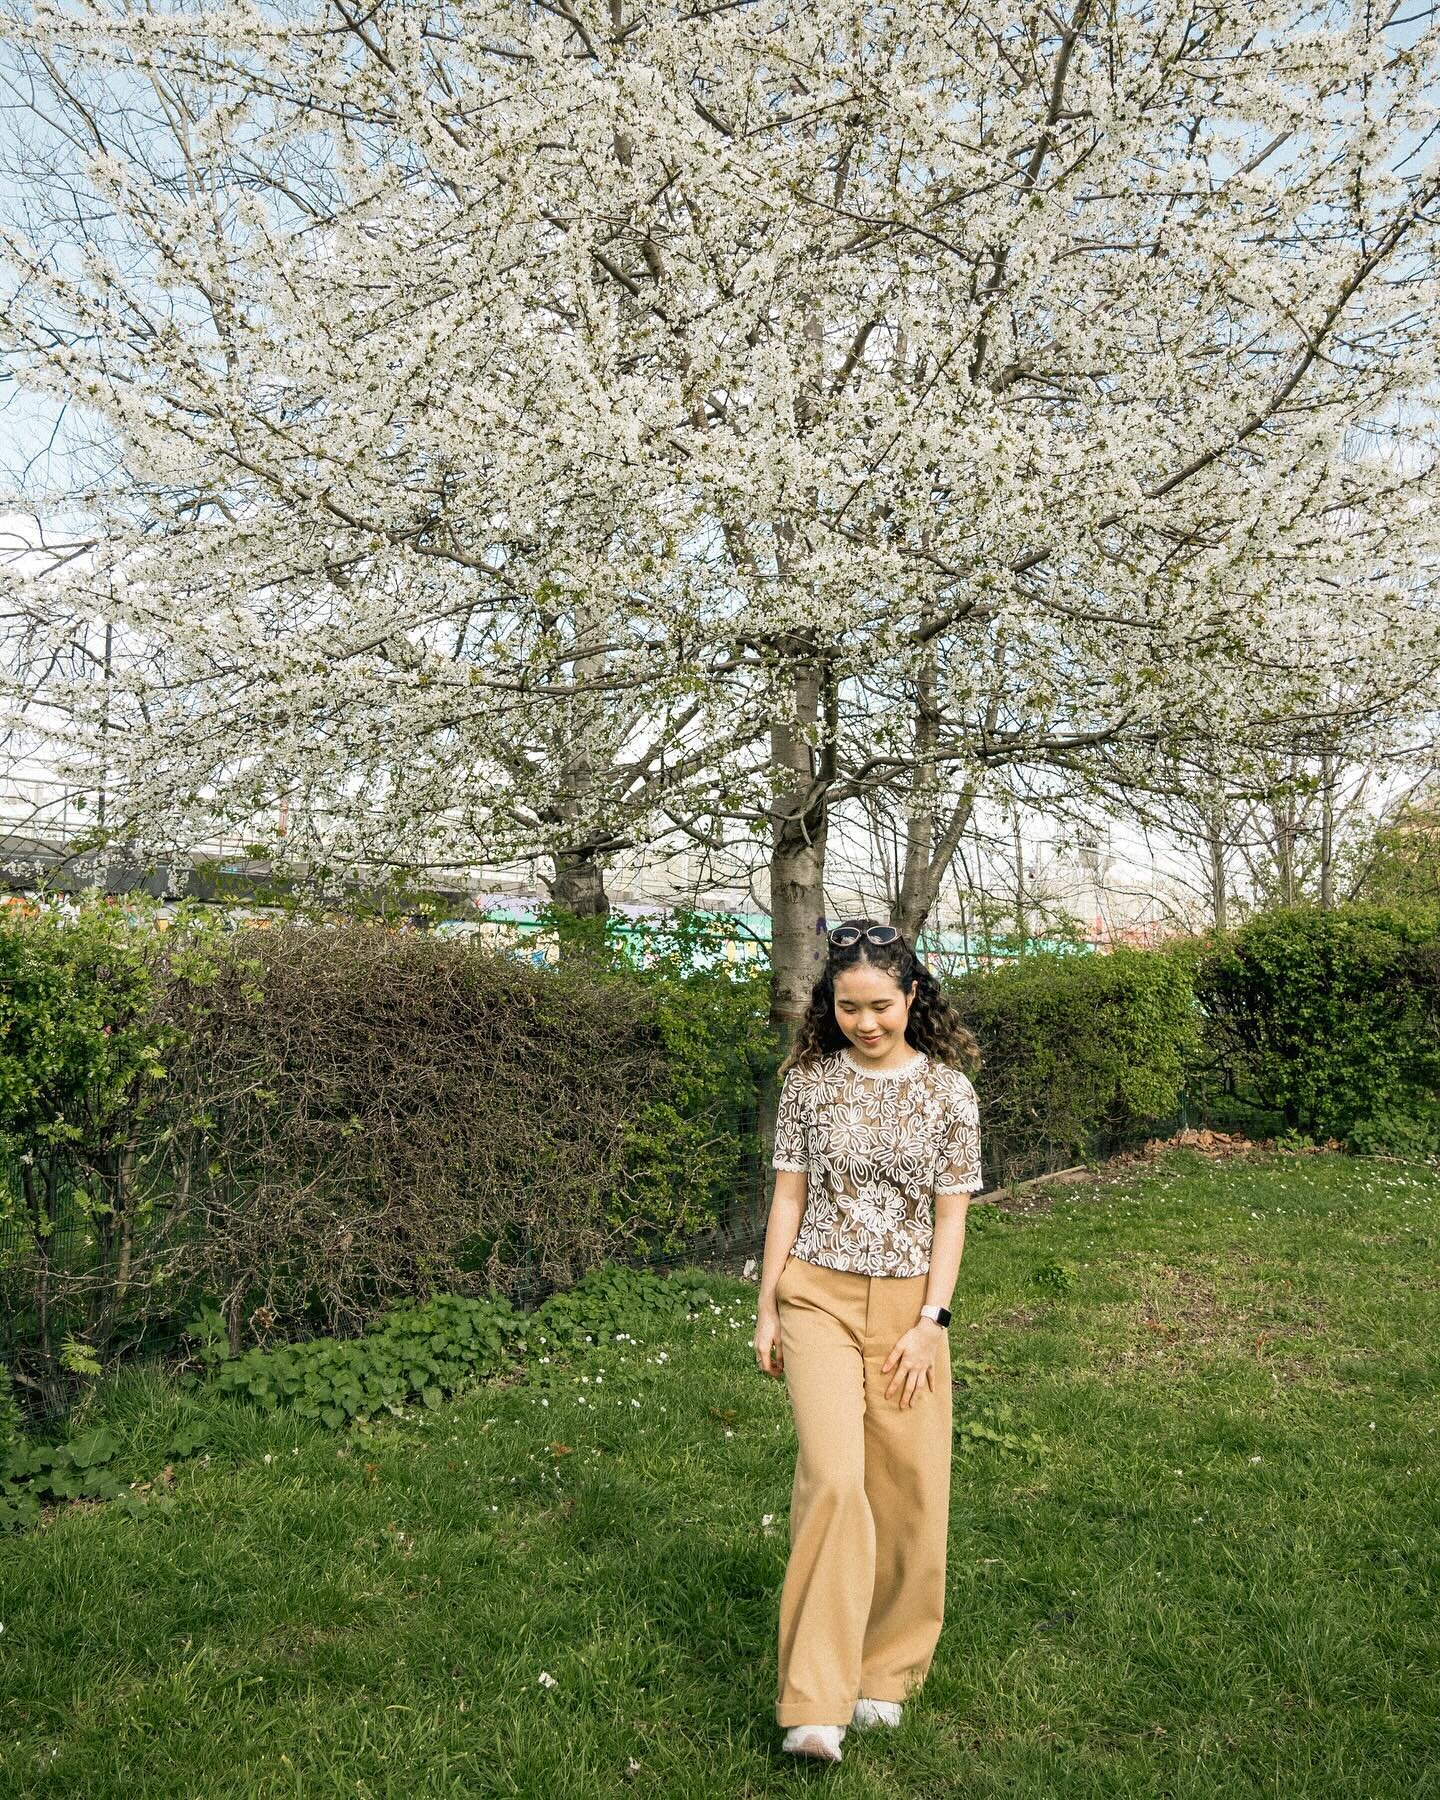 we were back in london playing tourists briefly at the start of the easter weekend 🩵🤍🩷
the city put on some stunning weather, a fine spring day with the cherry blossoms dancing in the sun 🌸 i&rsquo;ve been thinking that moving to bristol feels li